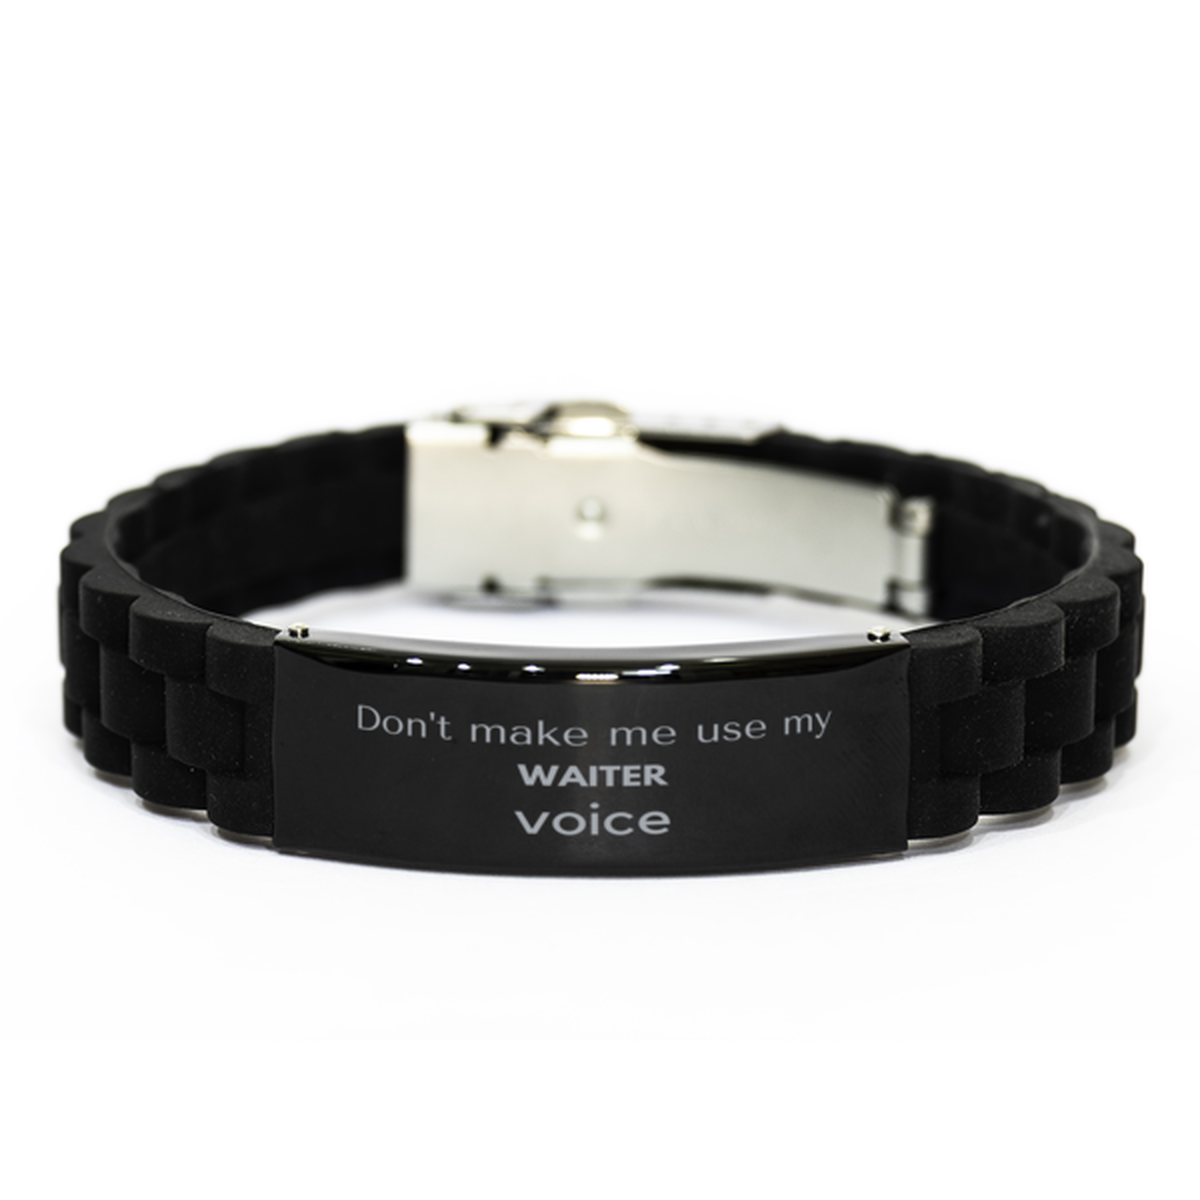 Don't make me use my Waiter voice, Sarcasm Waiter Gifts, Christmas Waiter Black Glidelock Clasp Bracelet Birthday Unique Gifts For Waiter Coworkers, Men, Women, Colleague, Friends